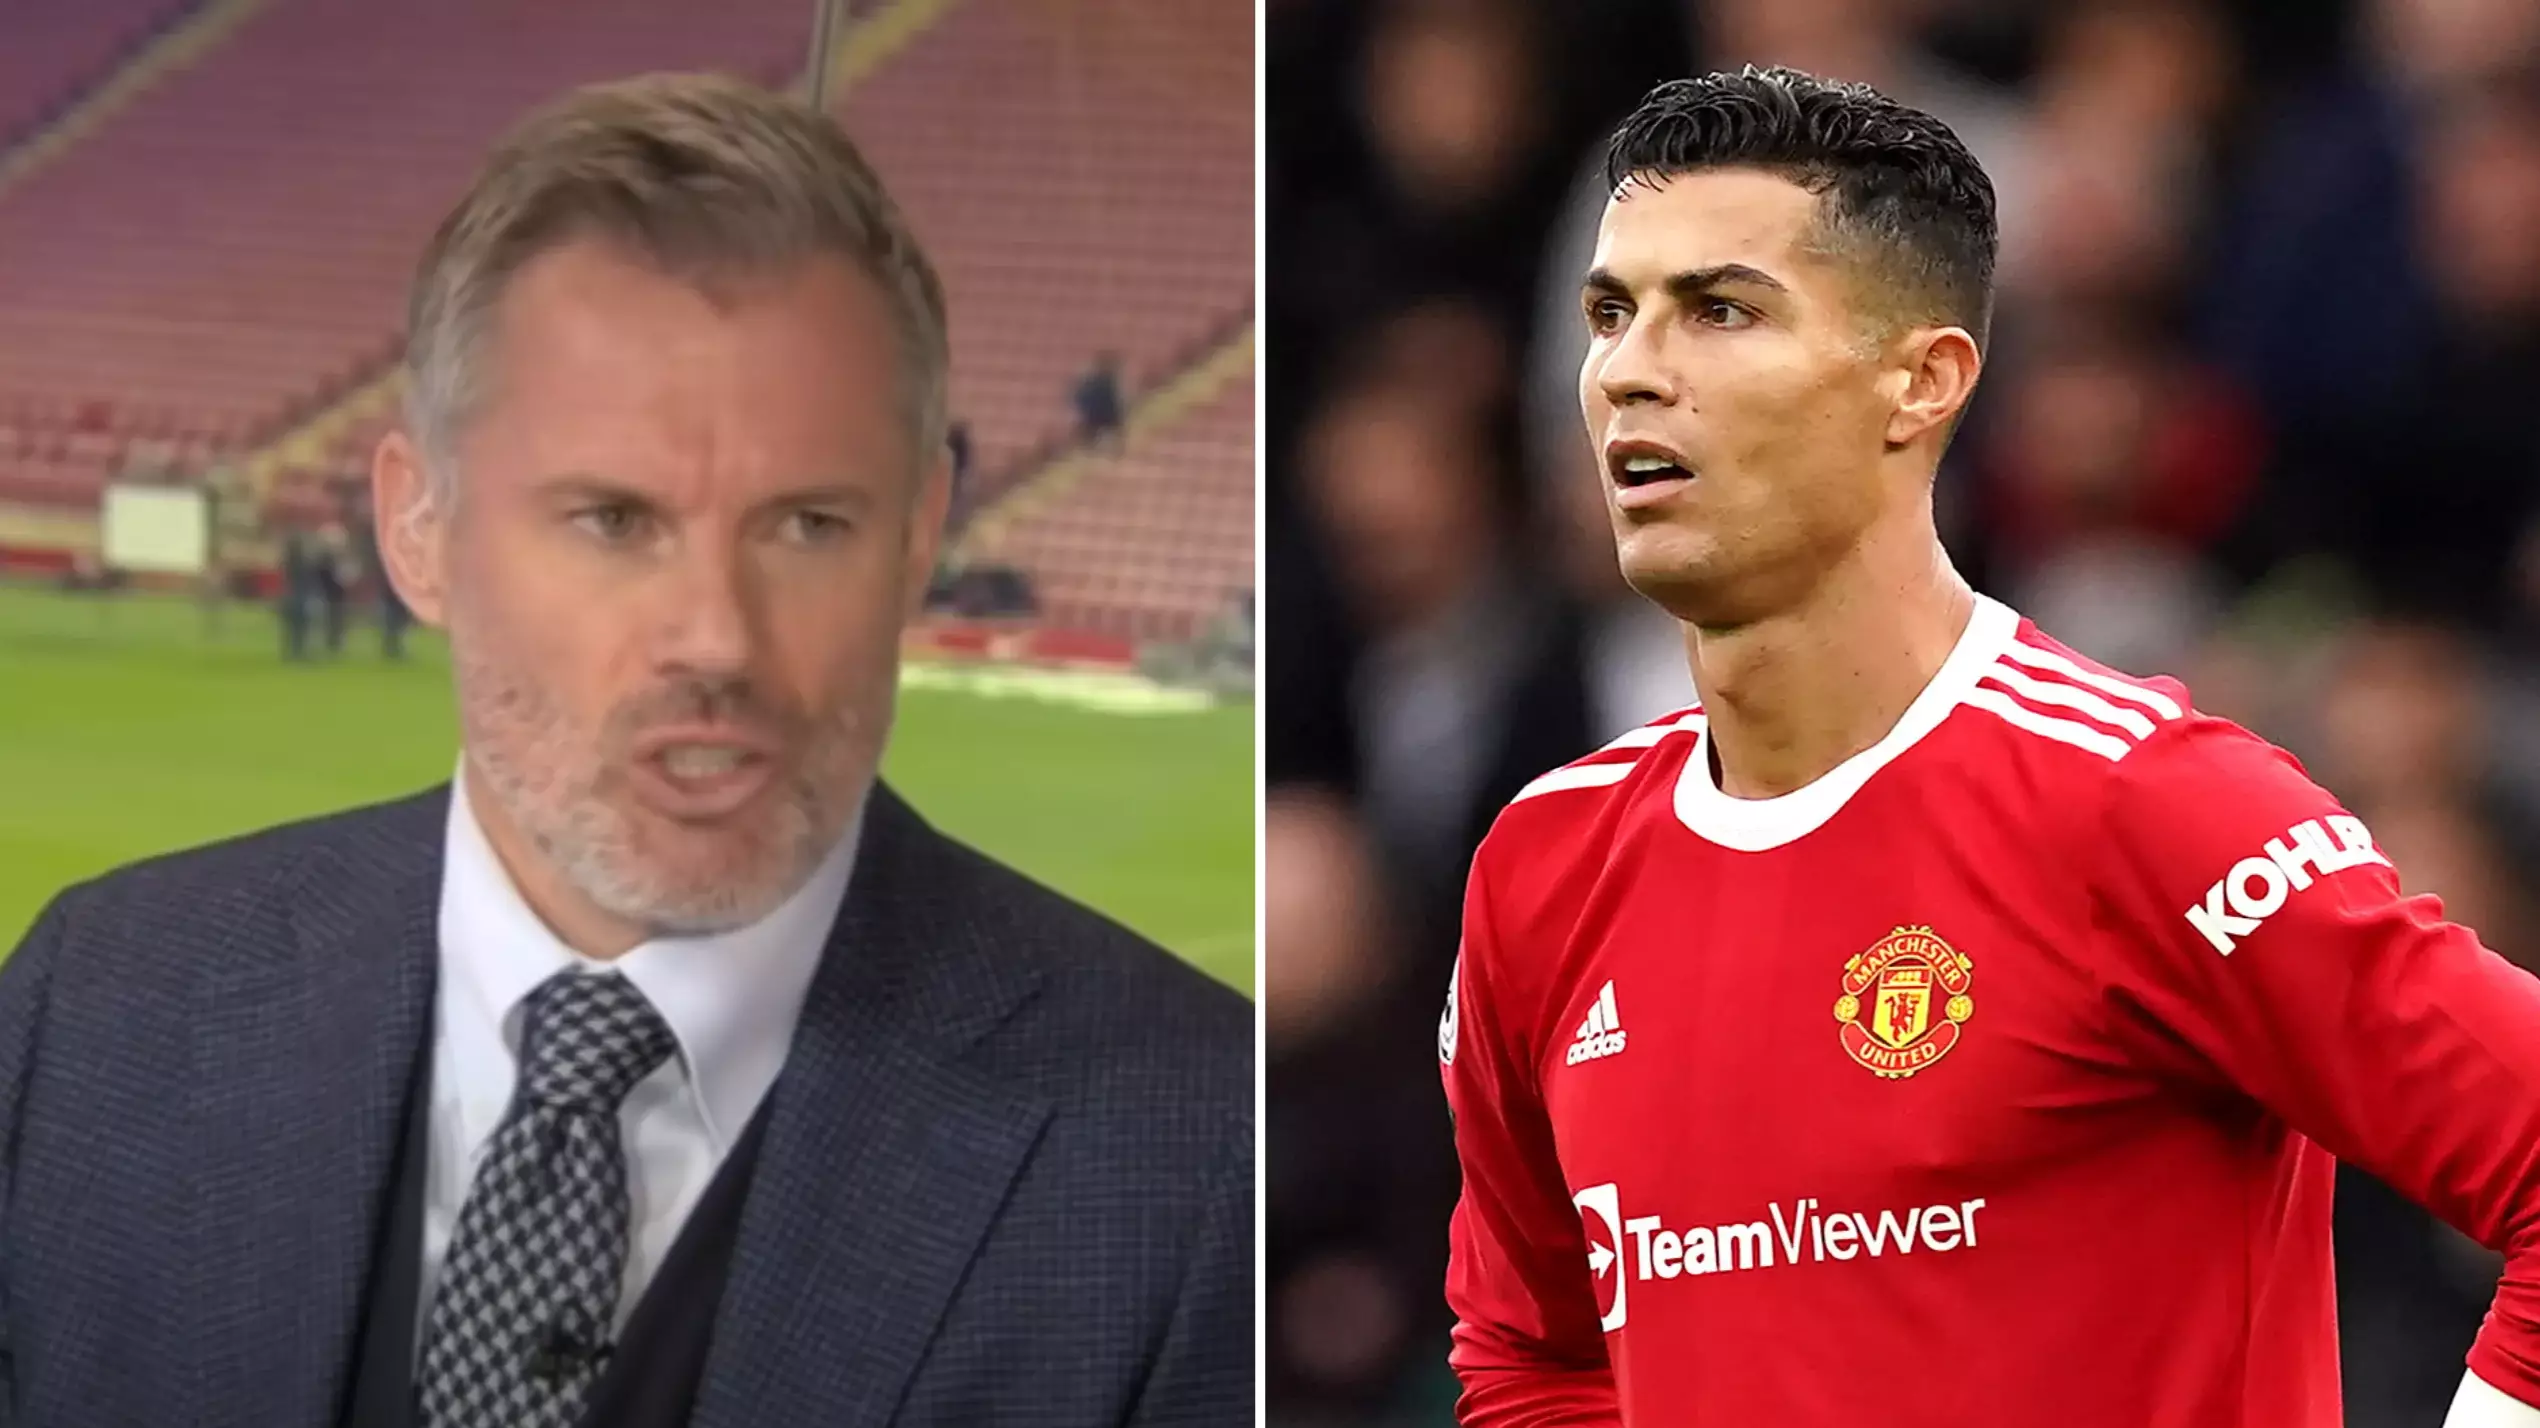 Jamie Carragher Names The 'Problem' Cristiano Ronaldo Makes Worse At Manchester United